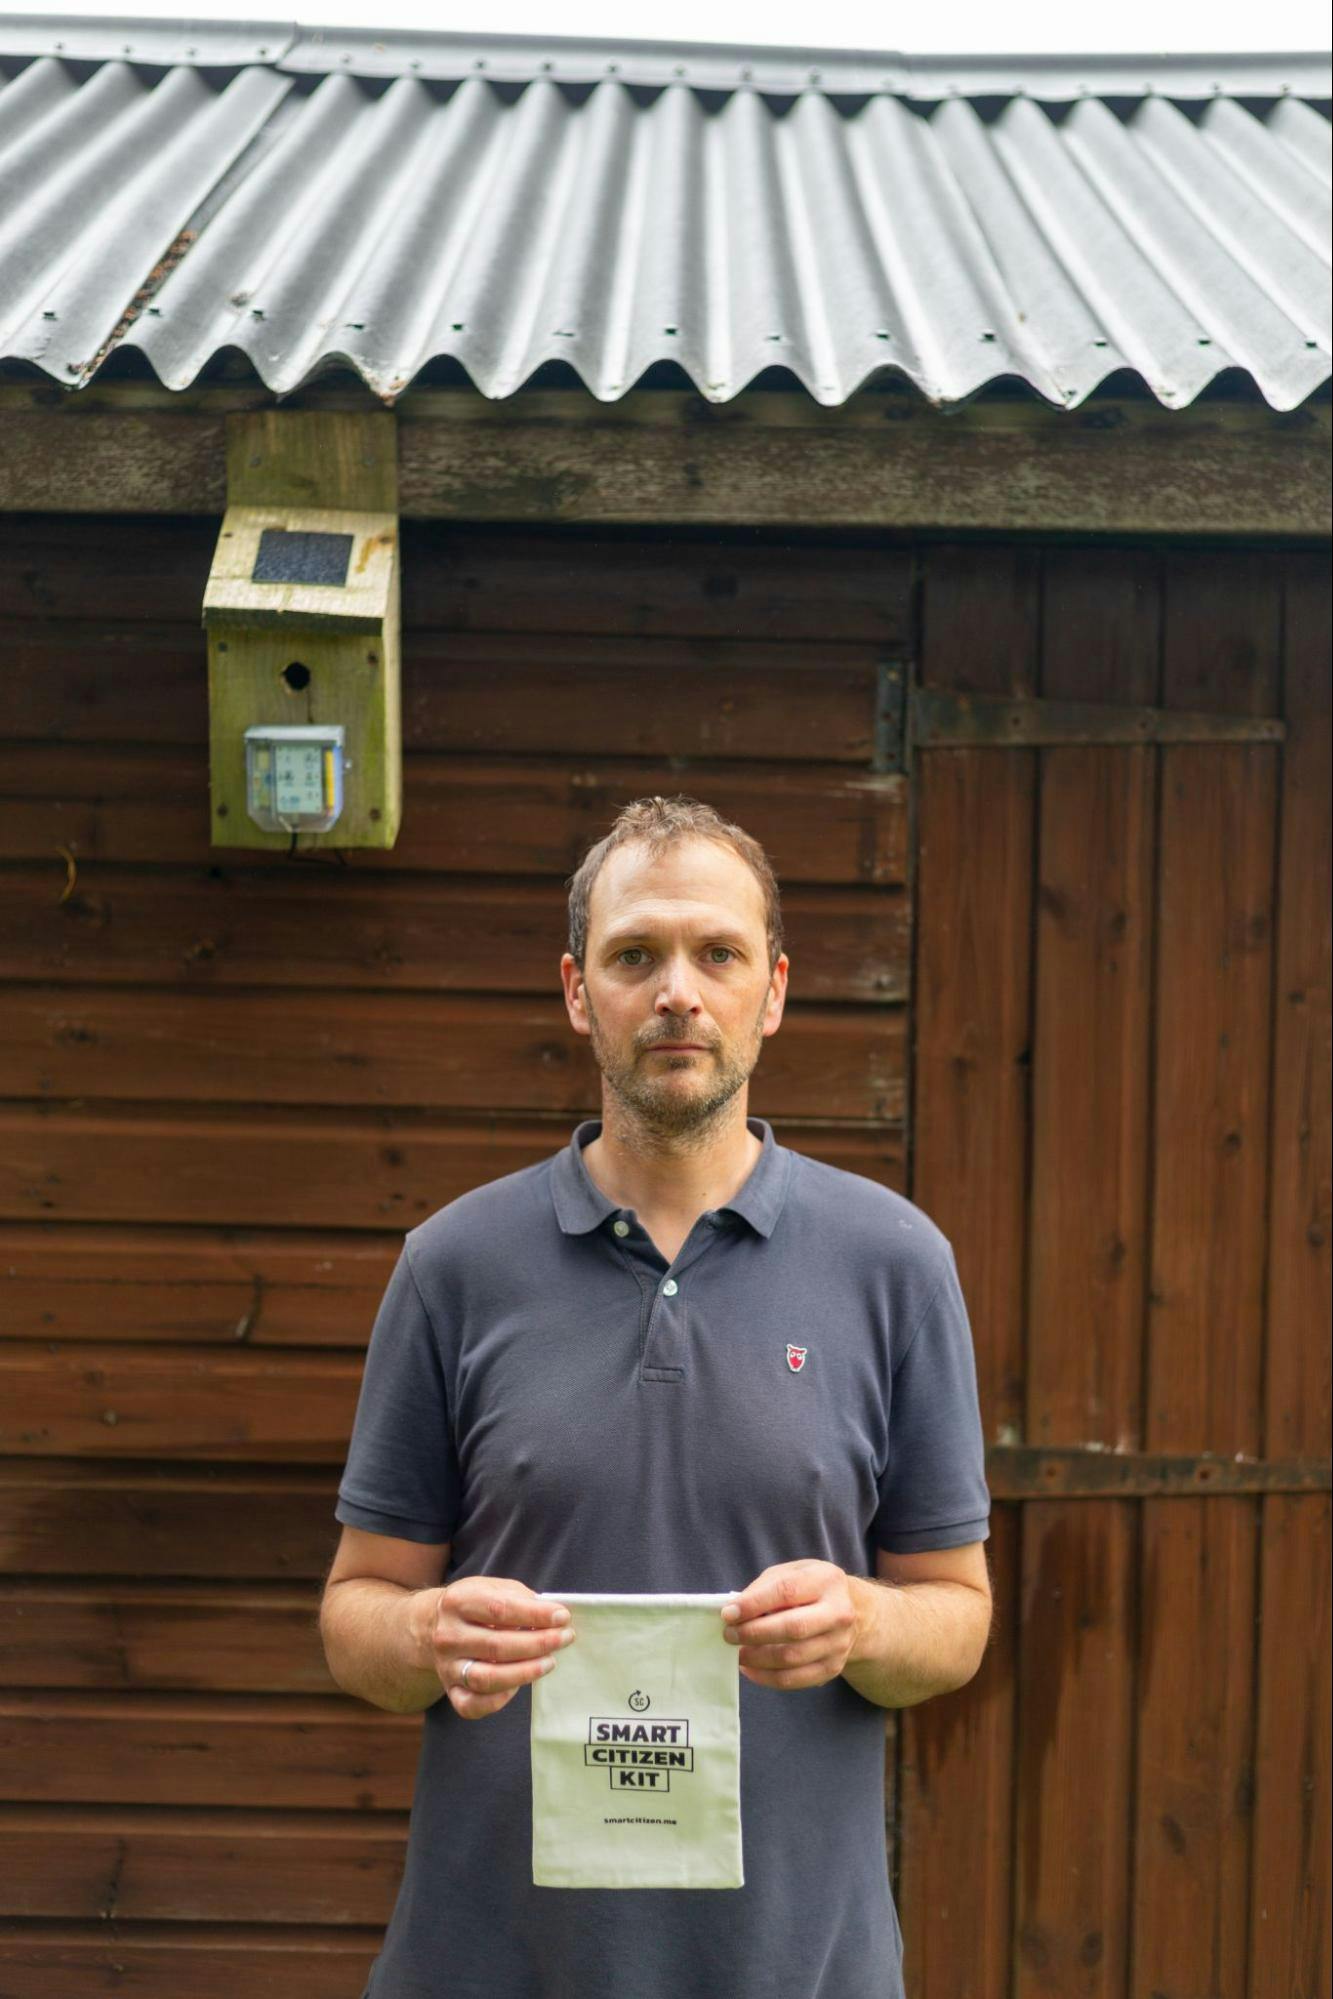 Local participant Tim Wornell with his Smart Citizen Kit Photo credit Ray Goodwin